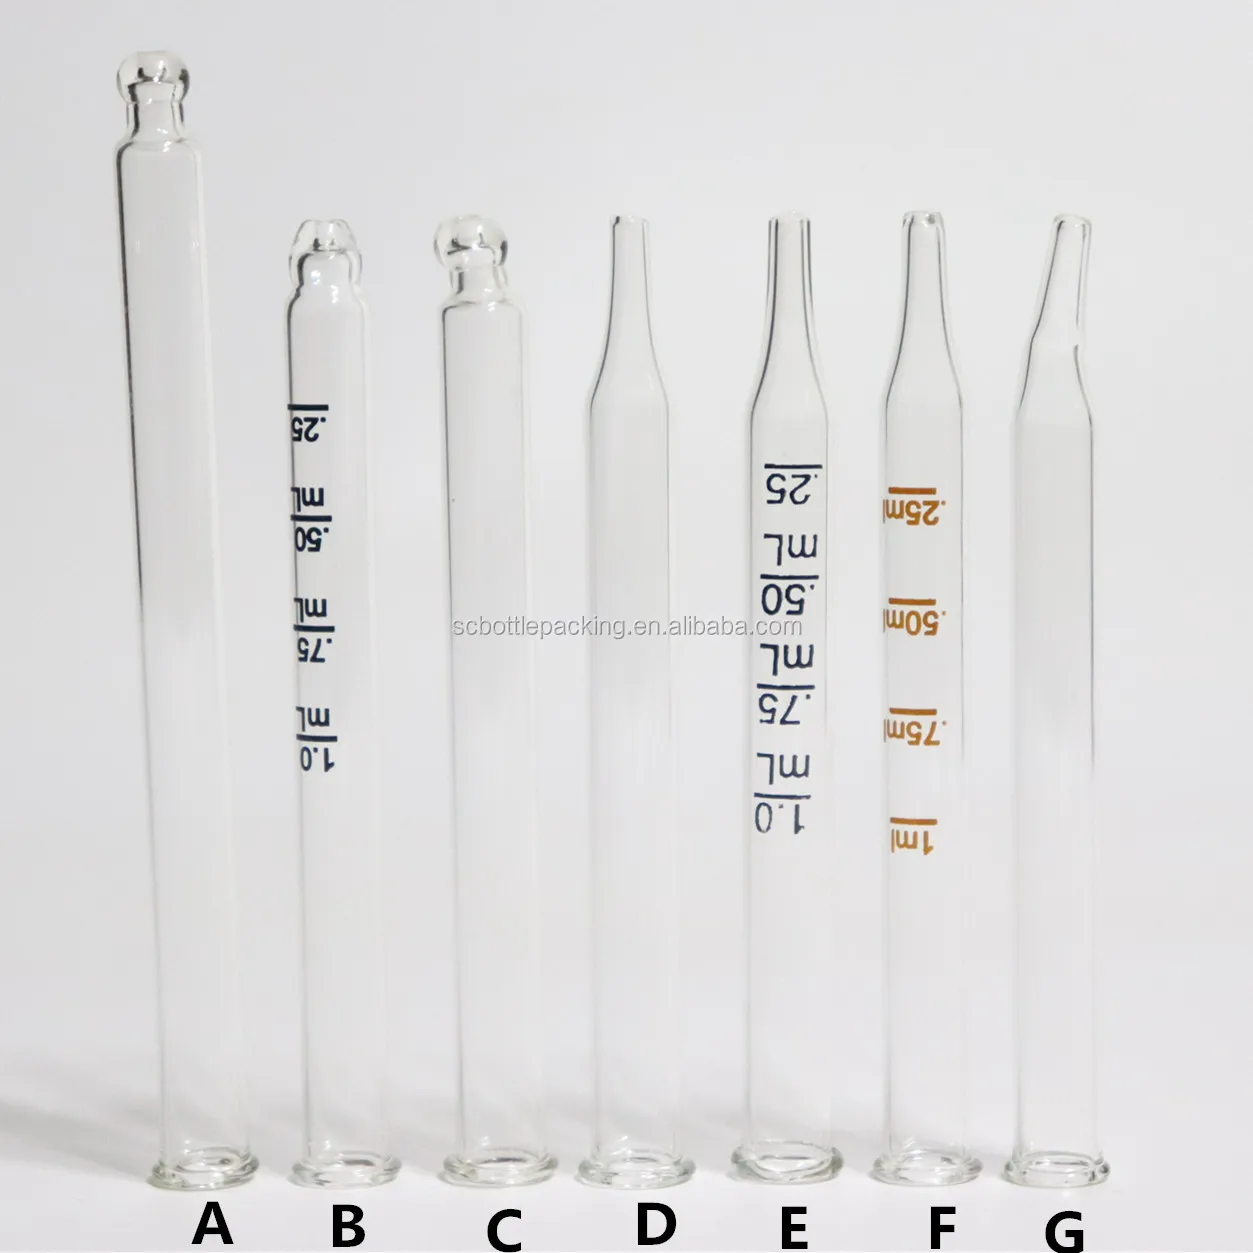 glass pipettes.jpg